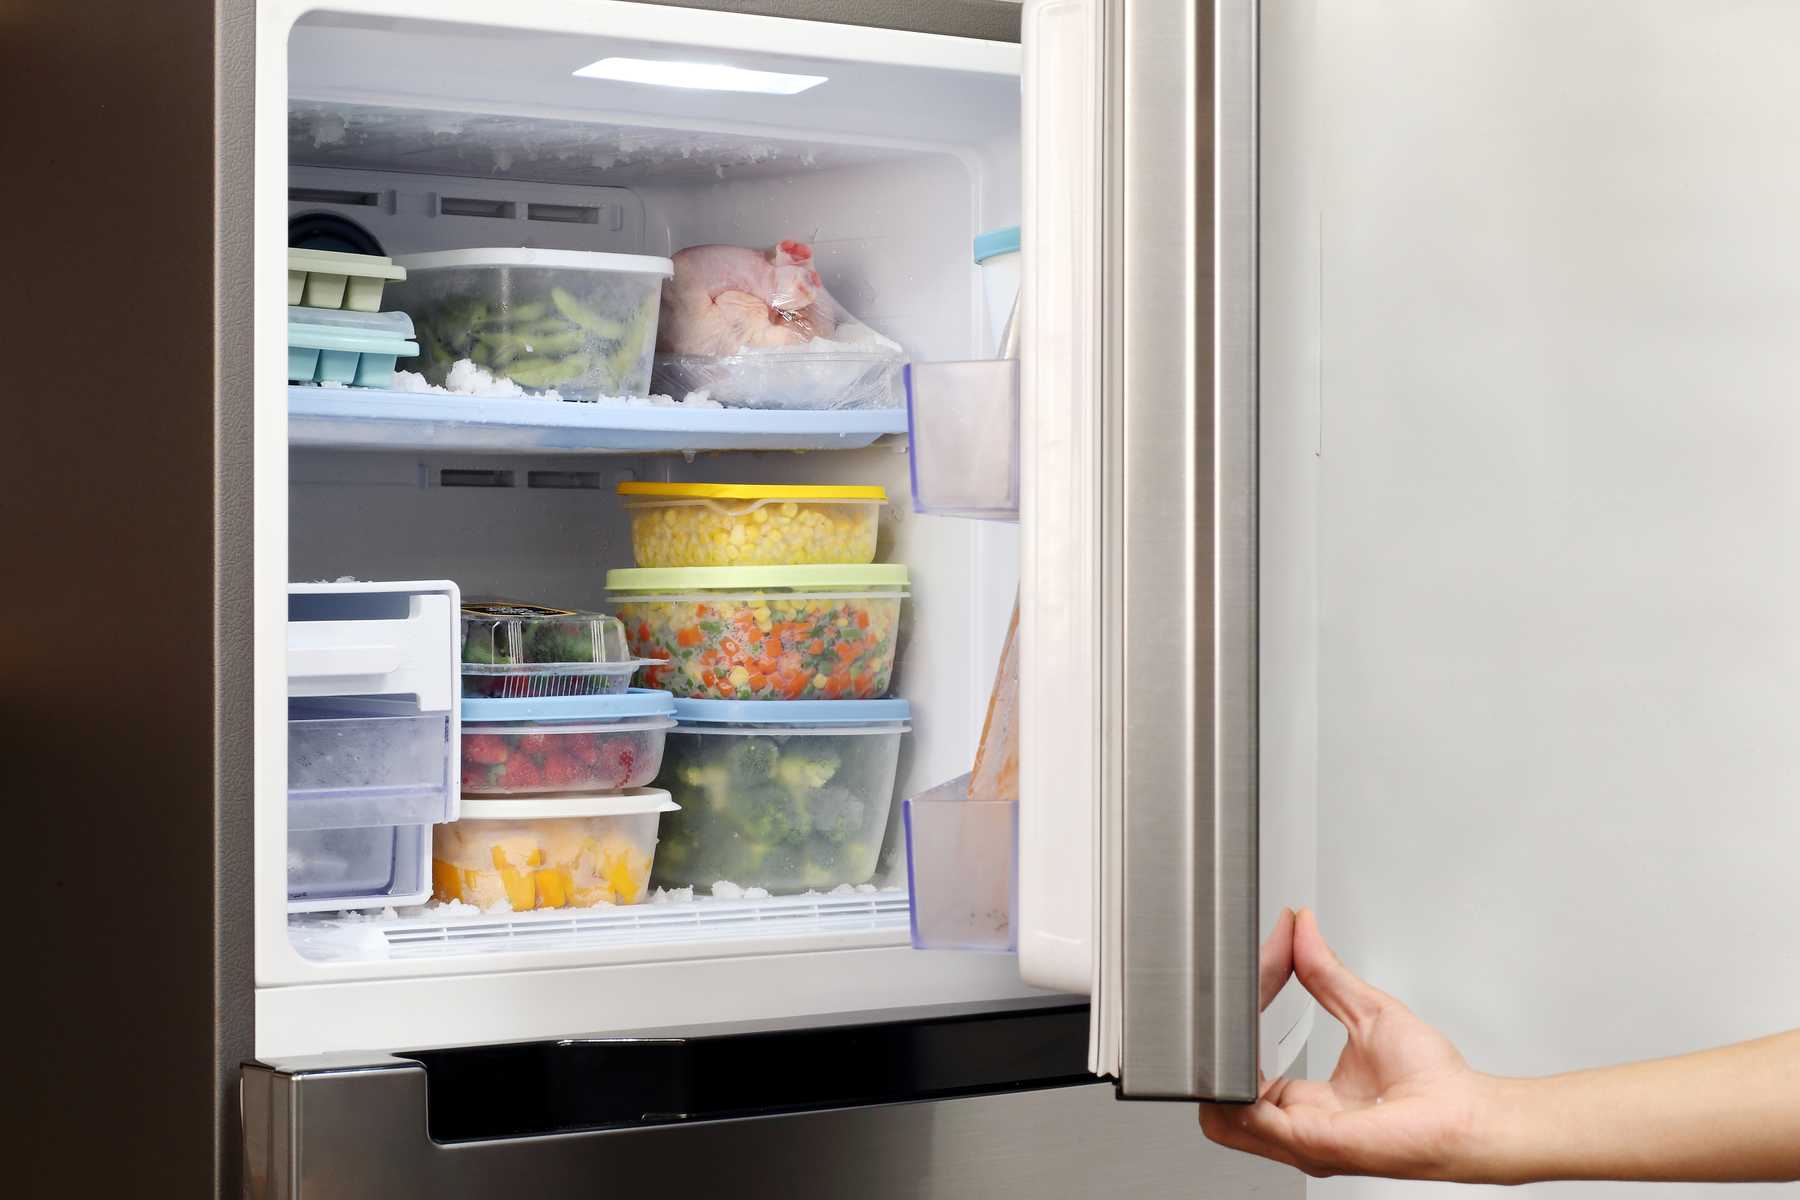 Suggested Methods For Defrosting A Freezer